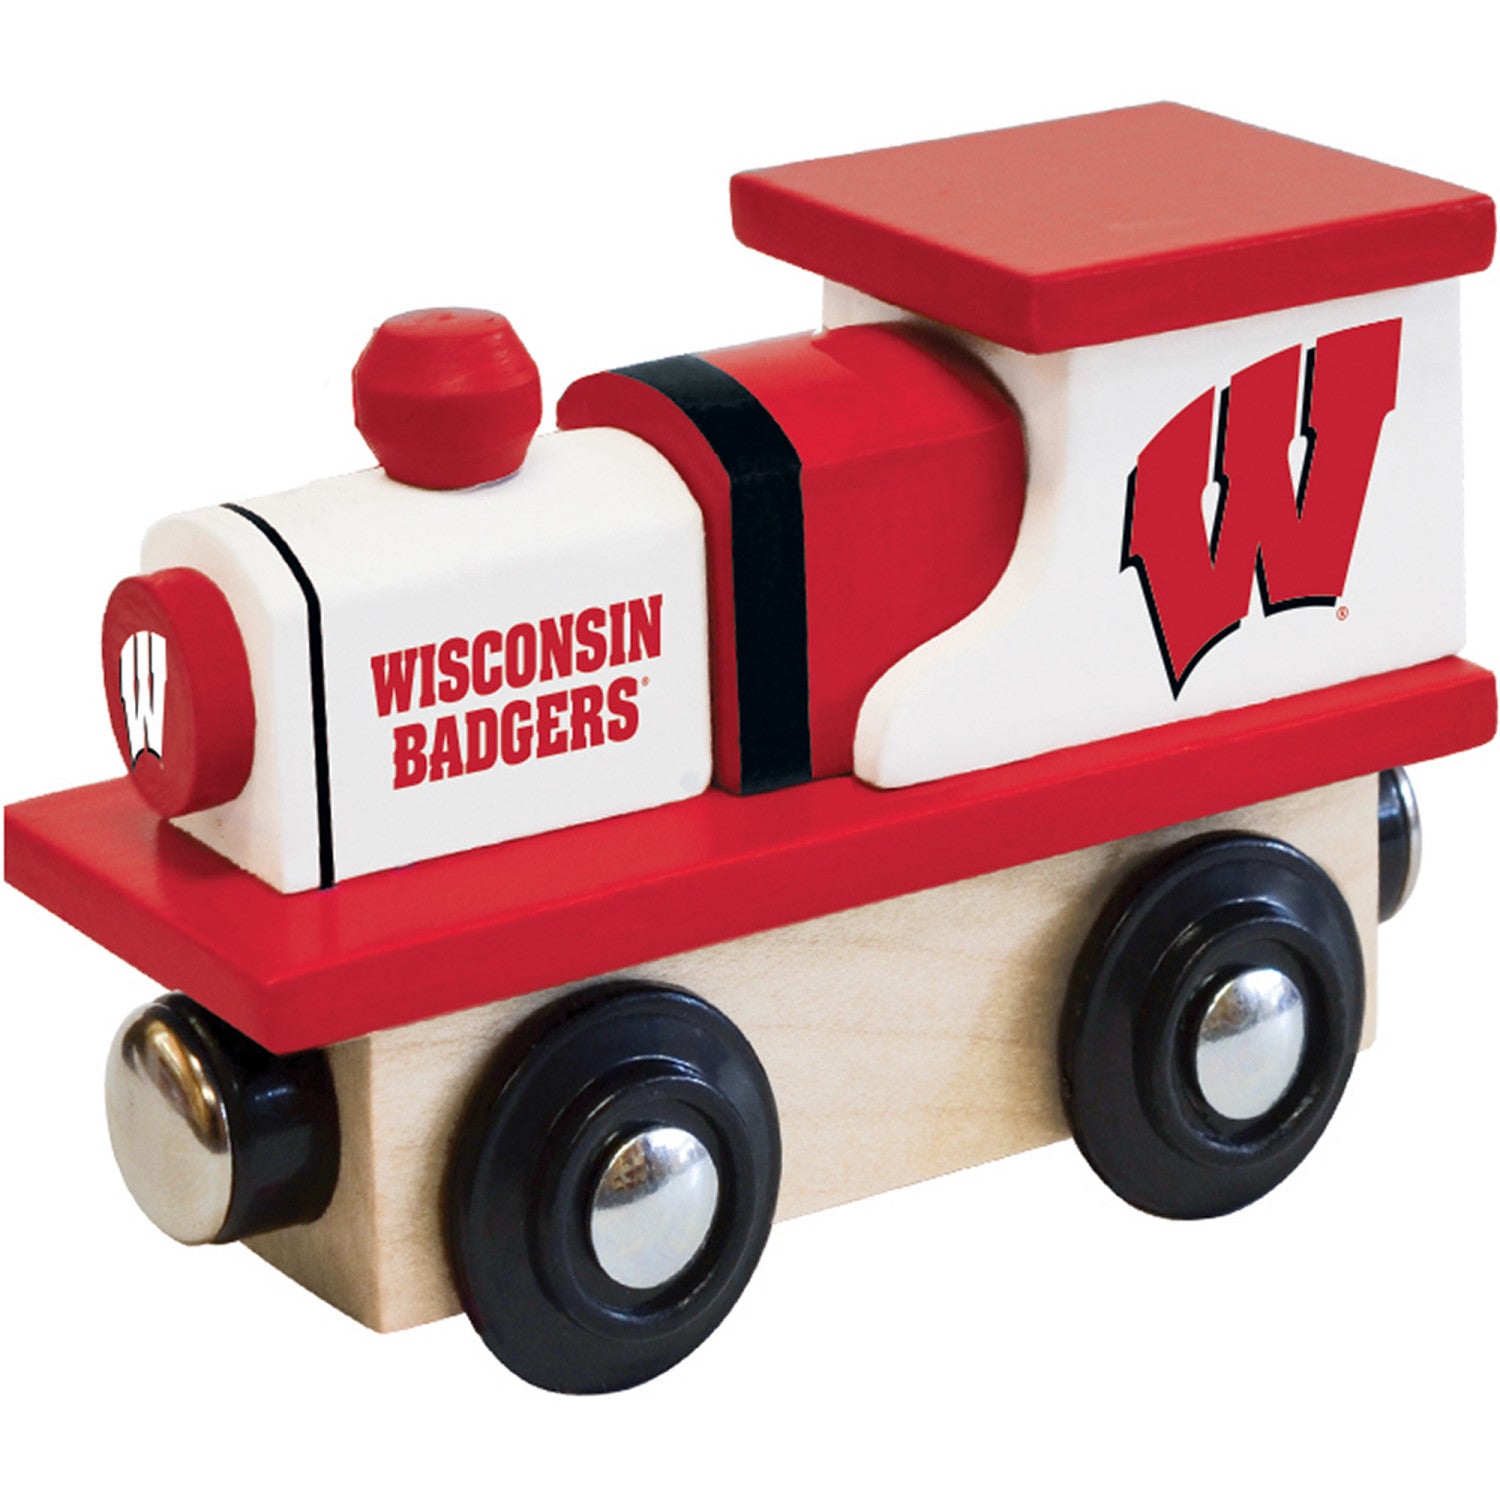 Wisconsin Badgers Toy Train Engine